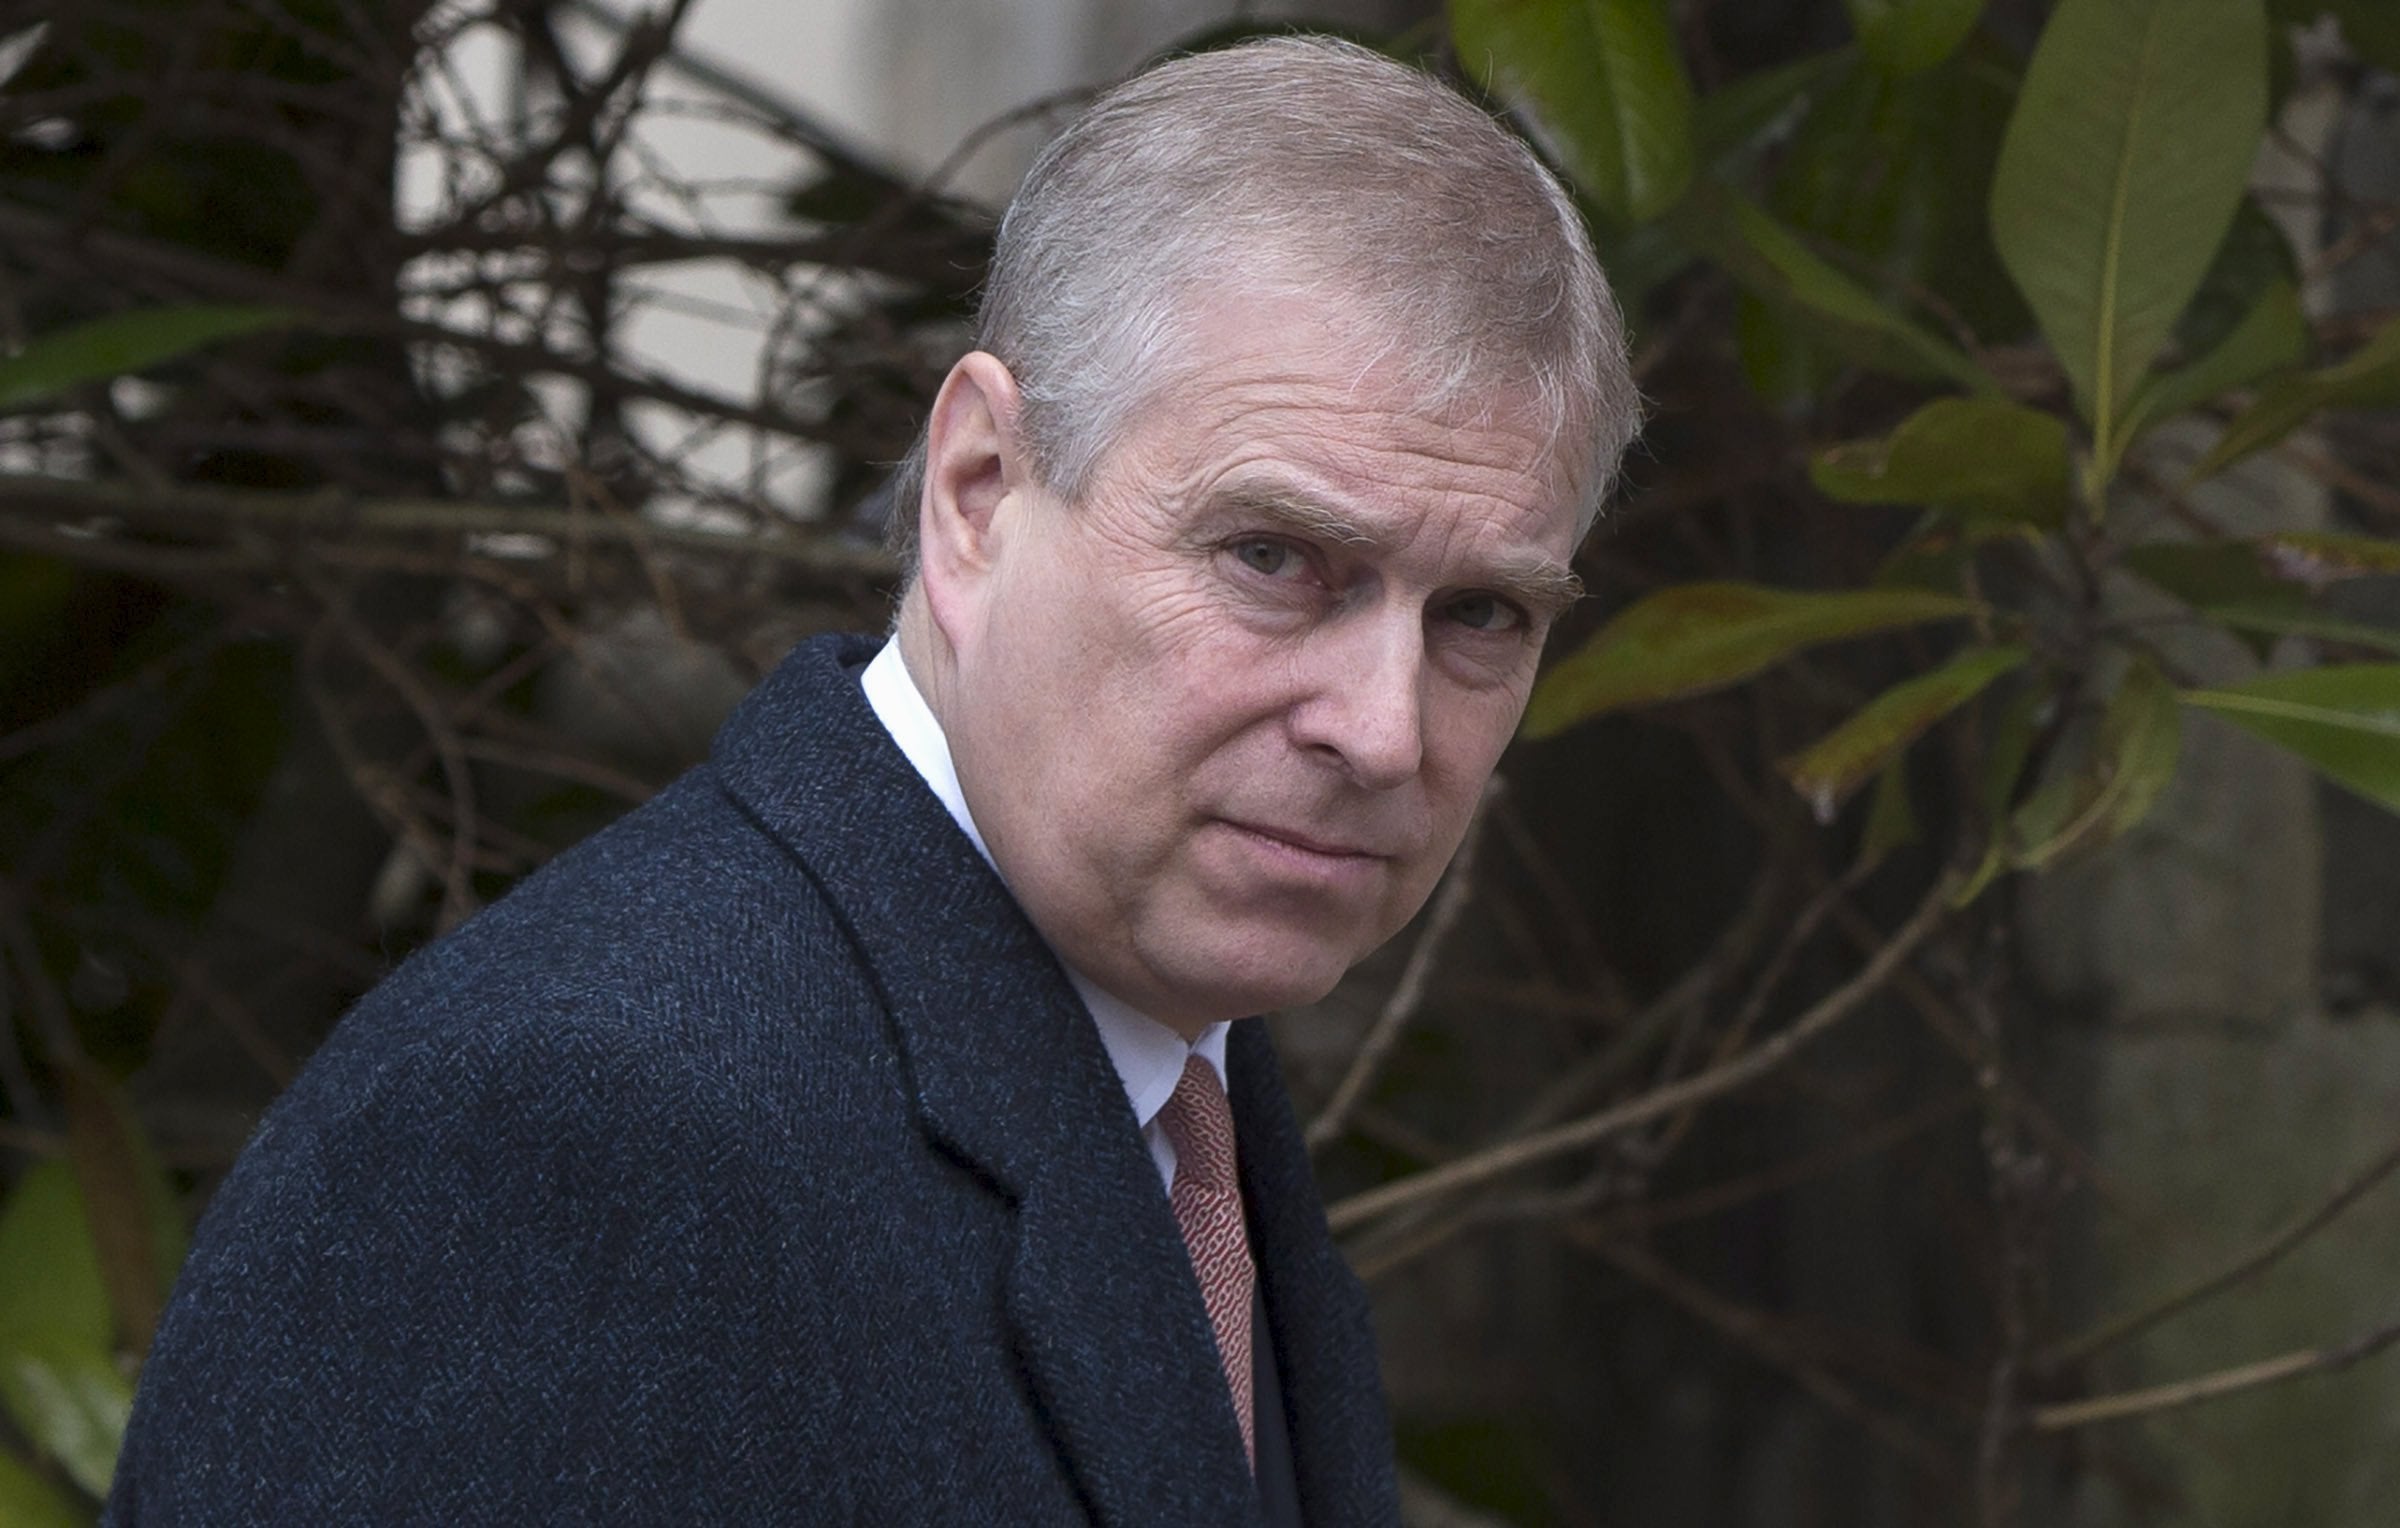 The Duke of York is understood to be planning to attend his father the Duke of Edinburgh’s memorial service (Neil Hall/PA)